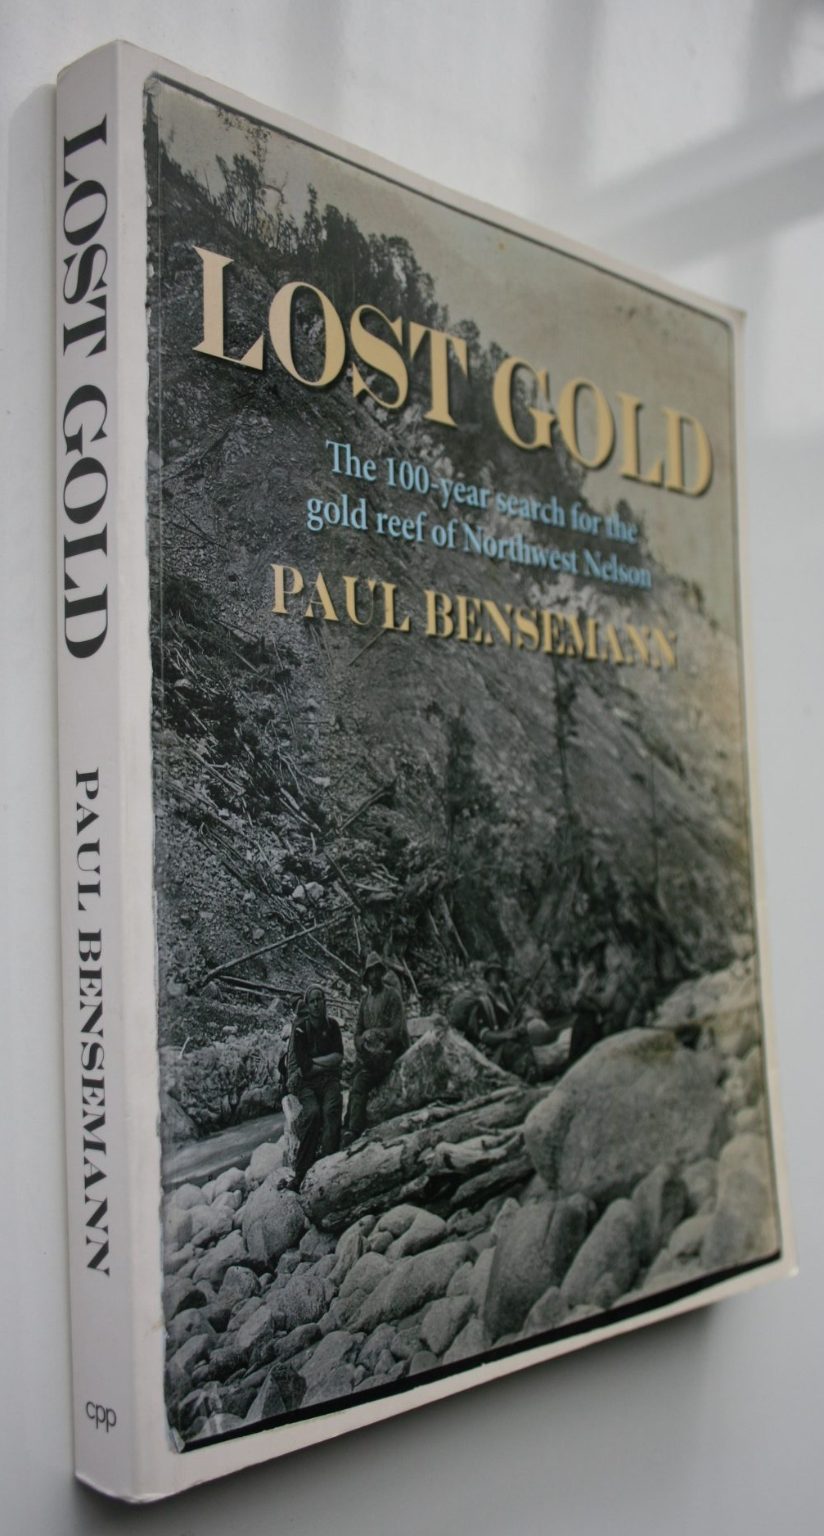 Lost Gold The 100-year Search for the Gold Reef of Northwest Nelson. By Paul Bensemann.